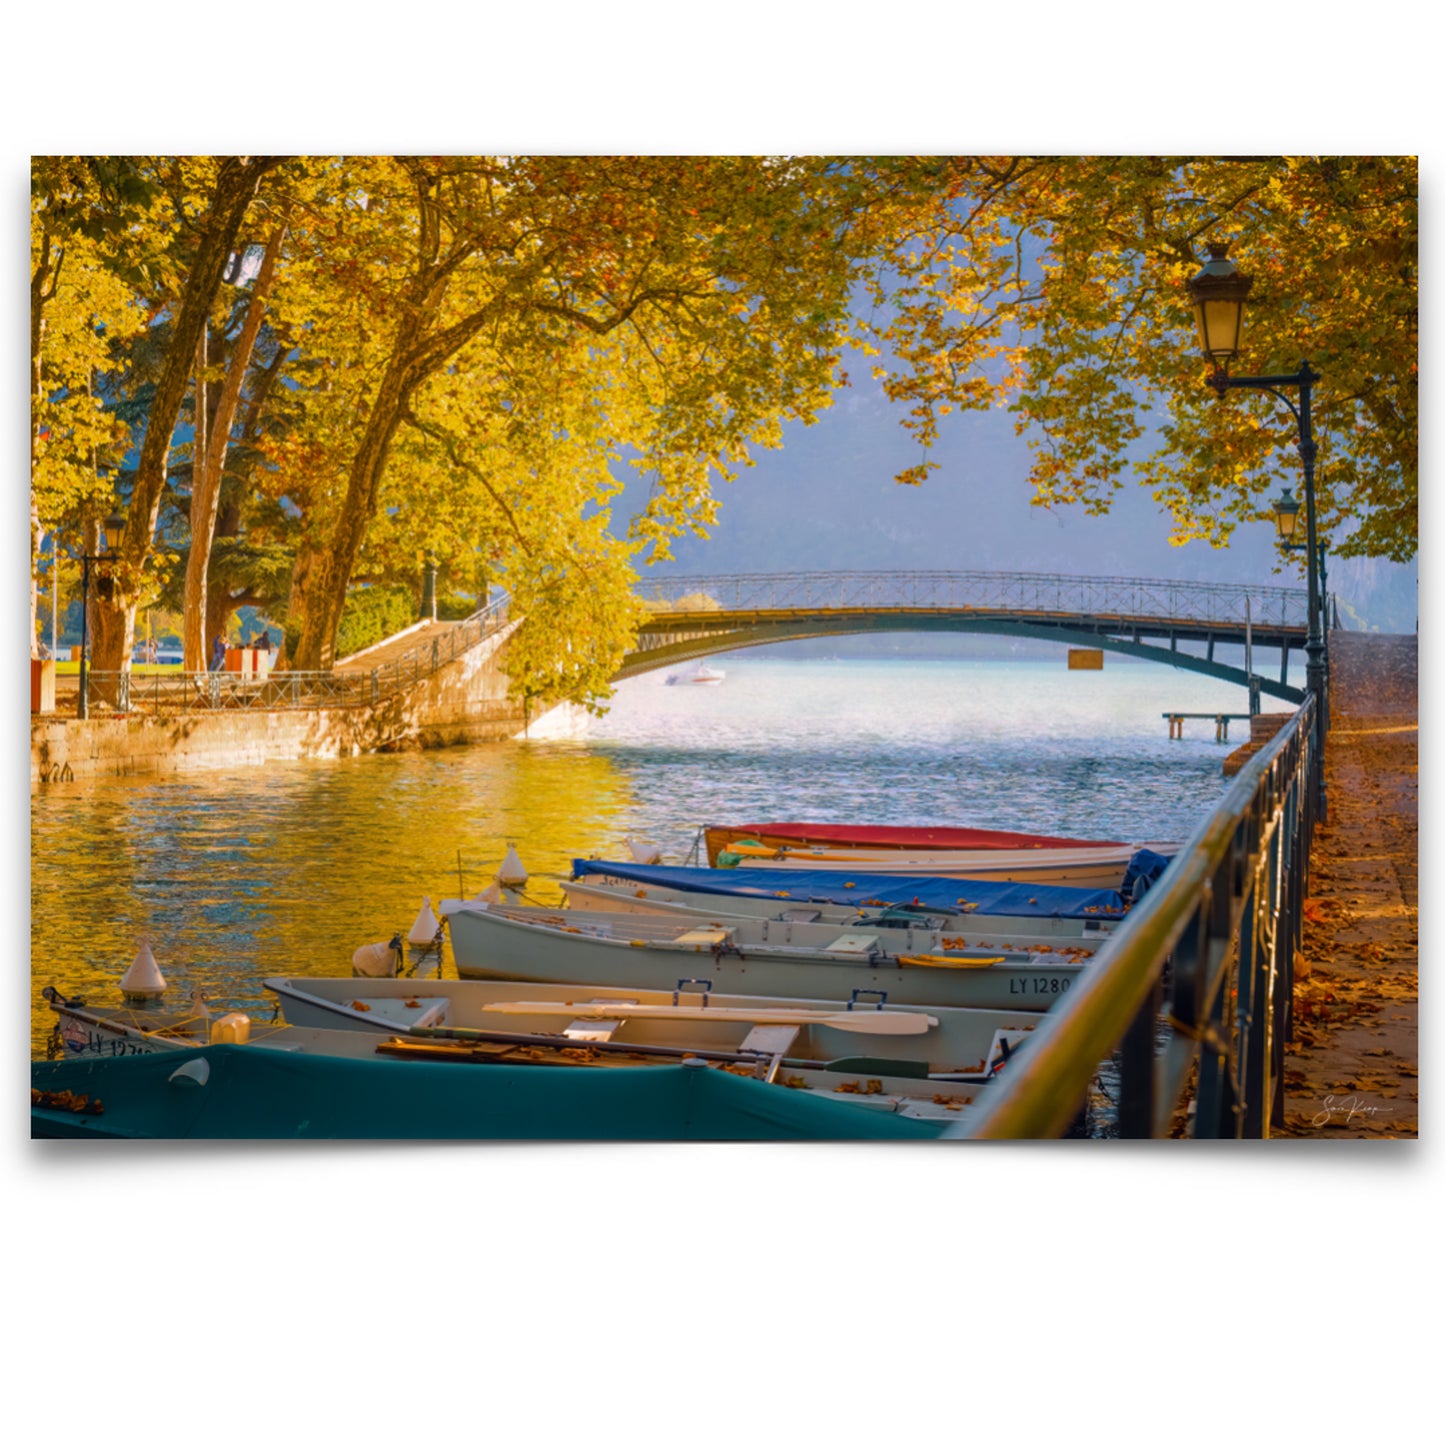 Pont Des Amours, Lake Annecy